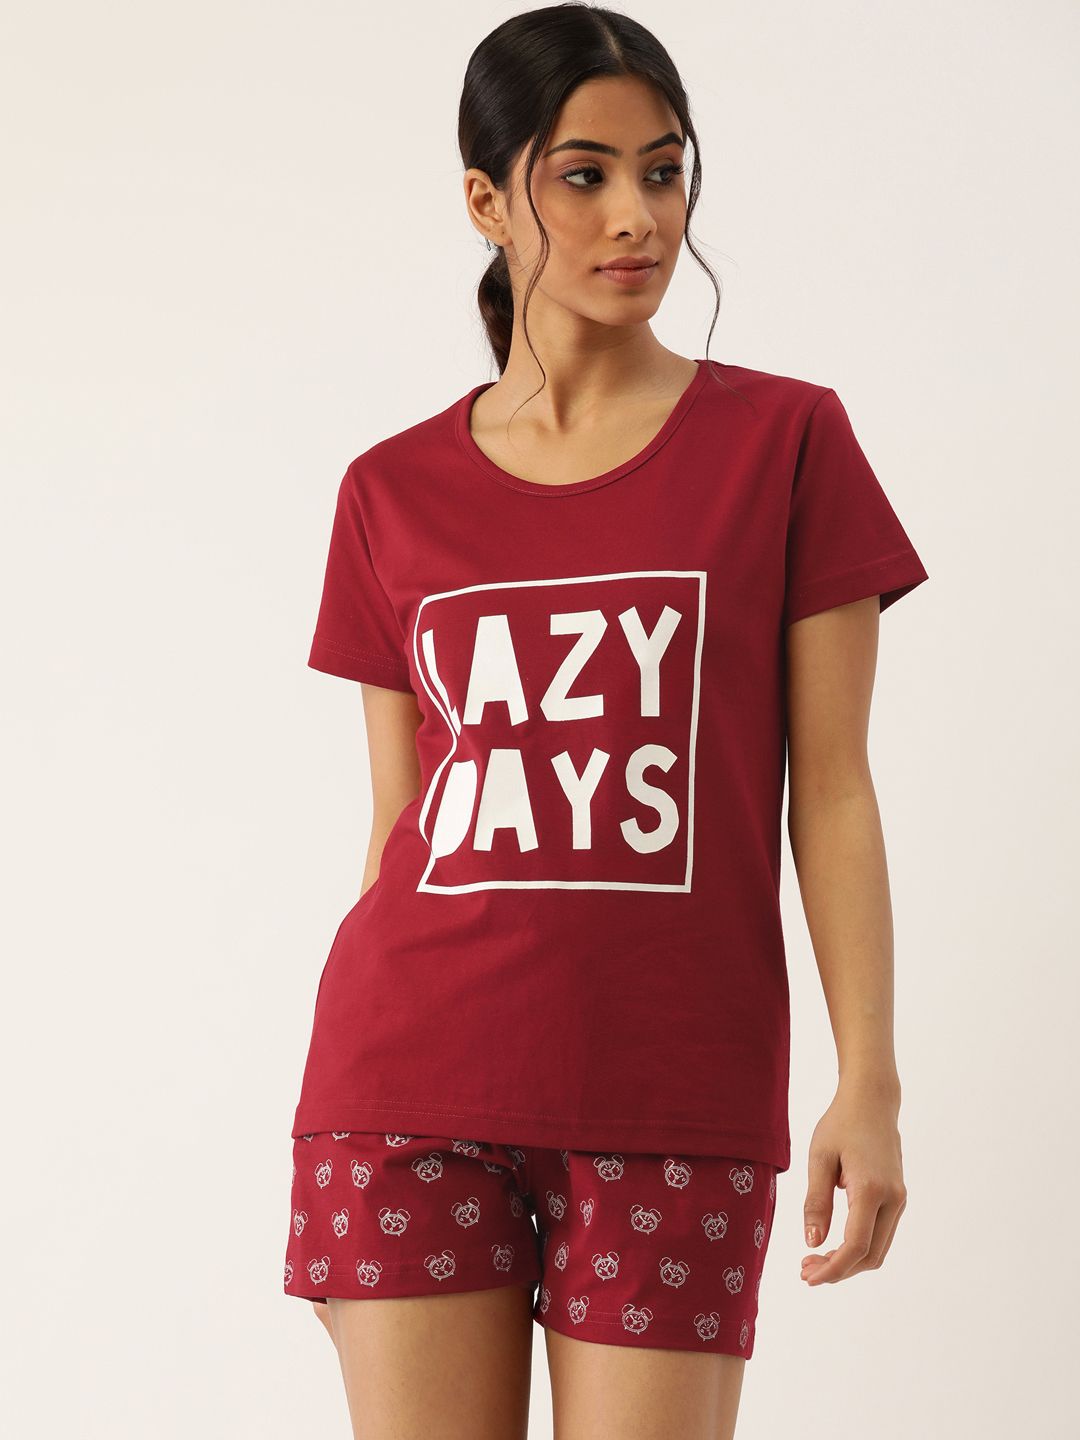 Nite Flite Women Maroon Printed Pure Cotton Lazy Days Shorts Set Price in India